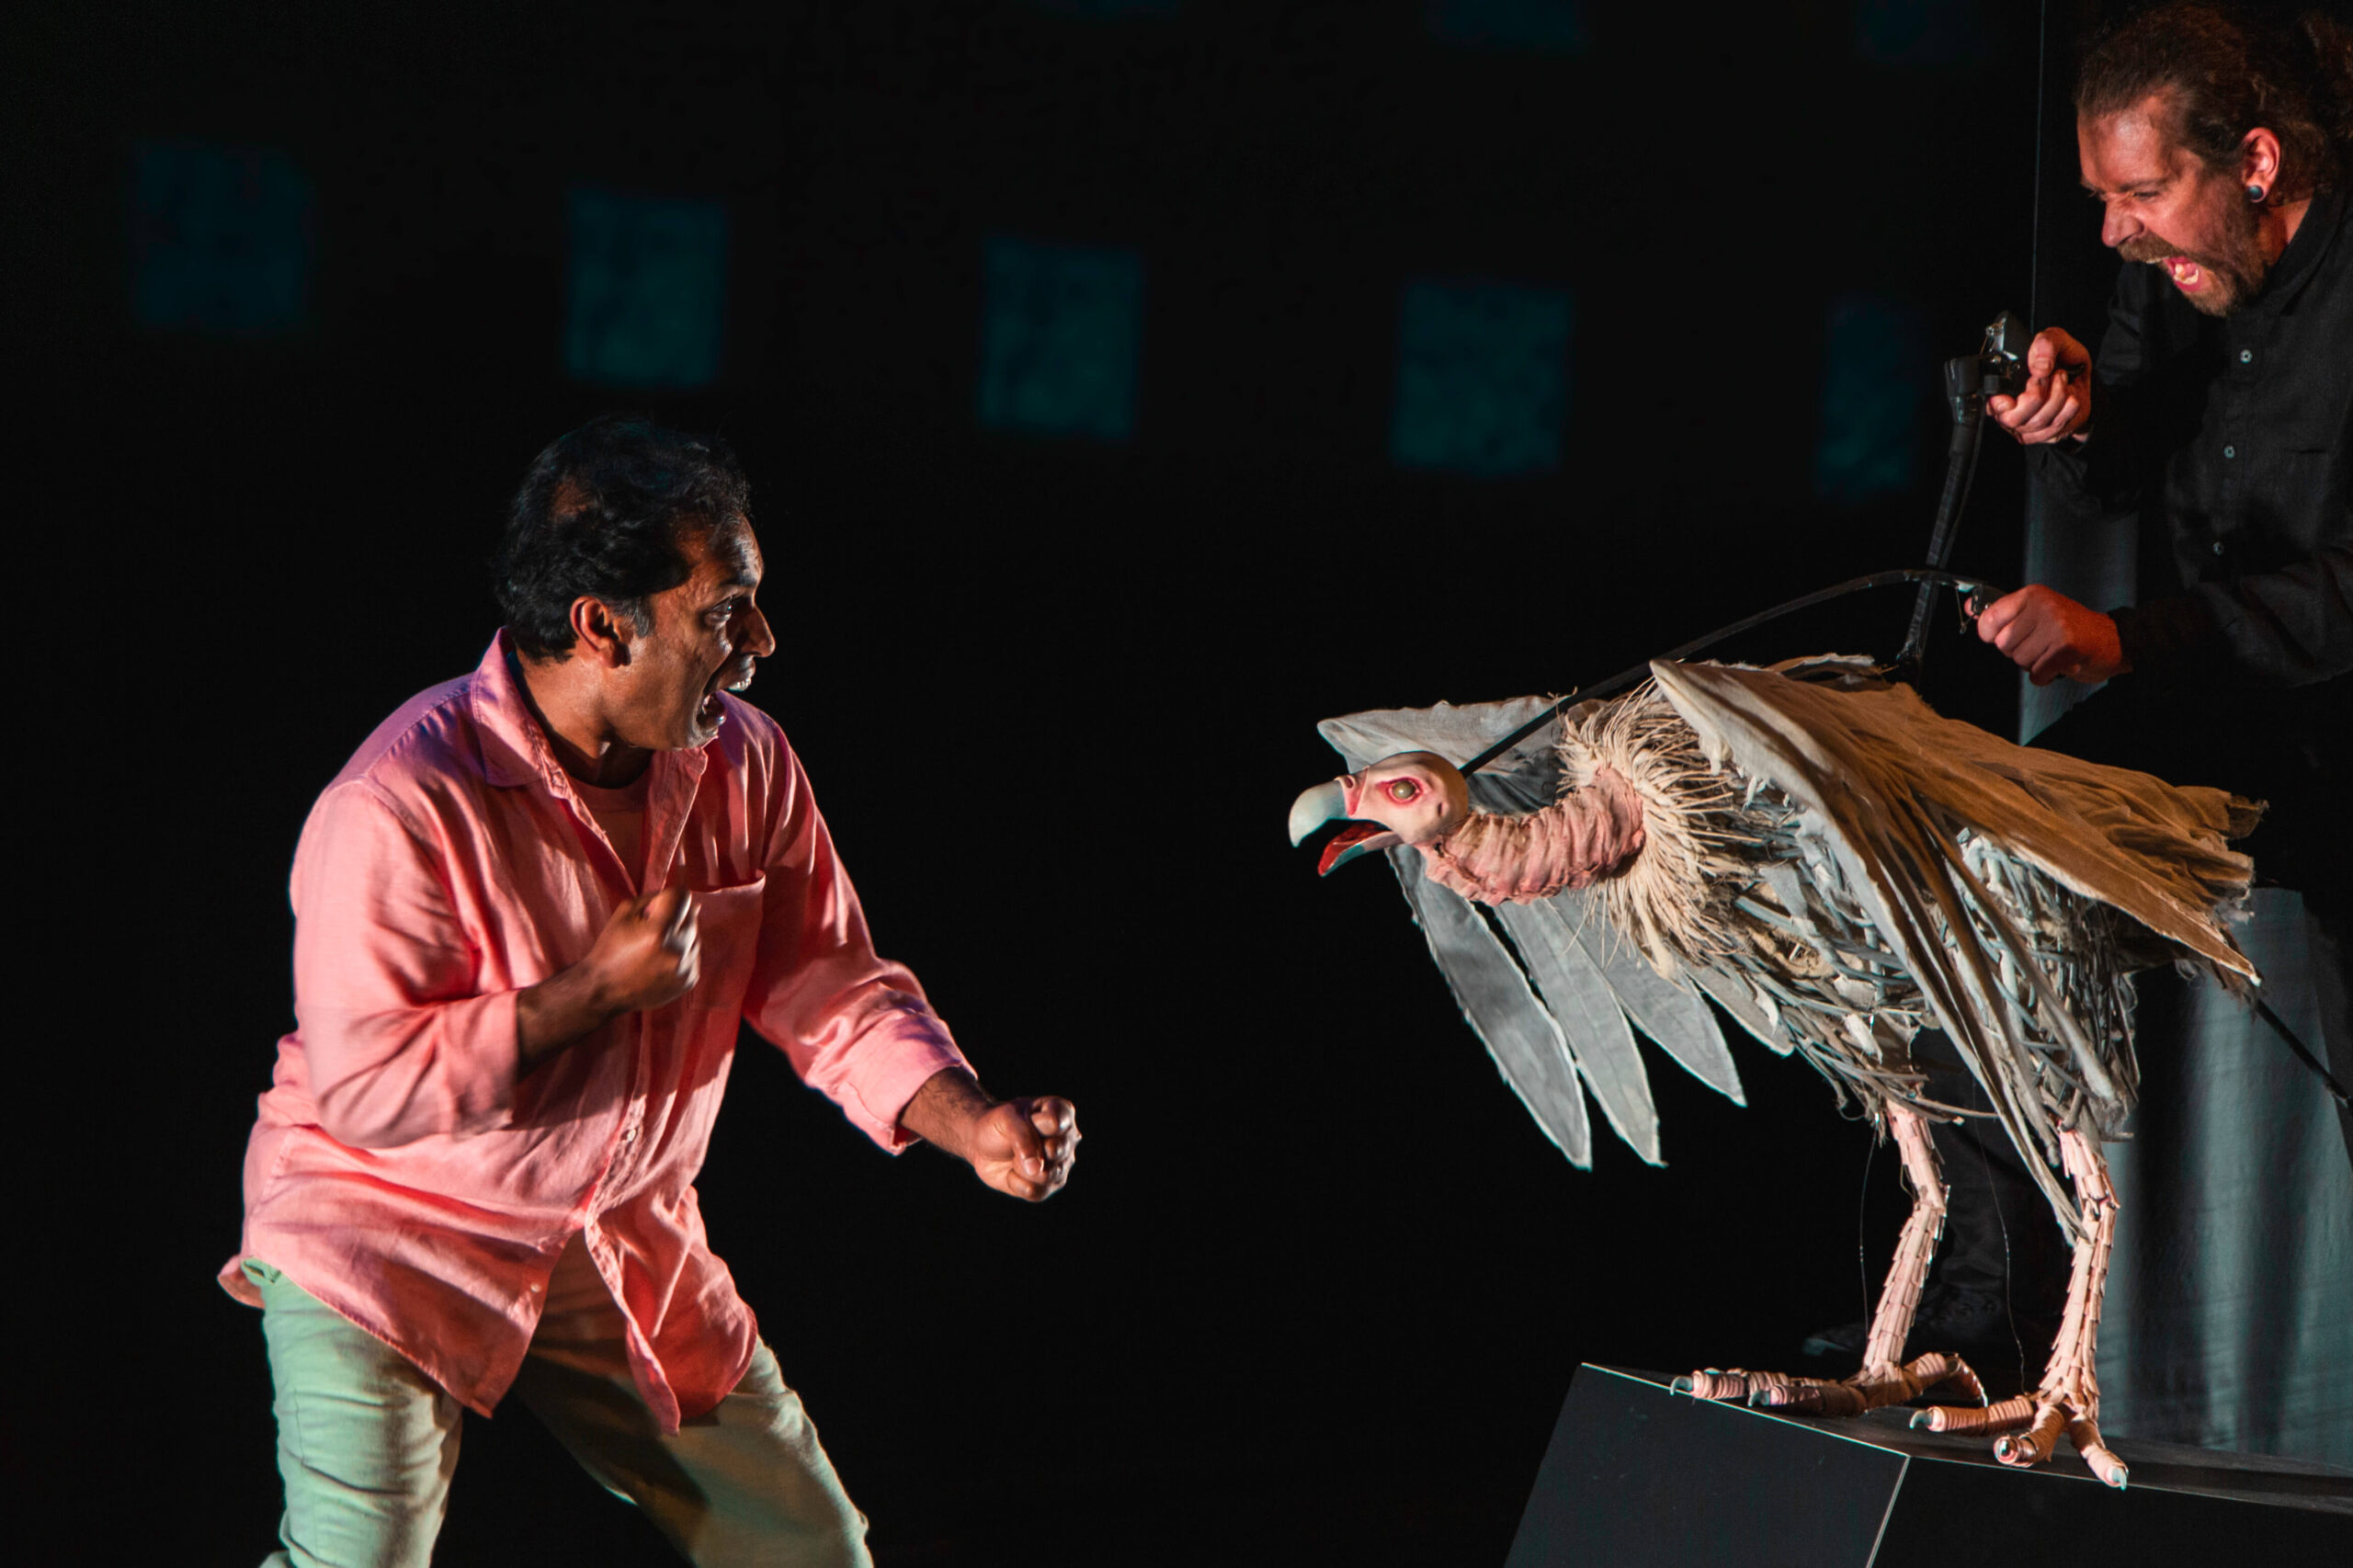 Man being chased by puppet vulture